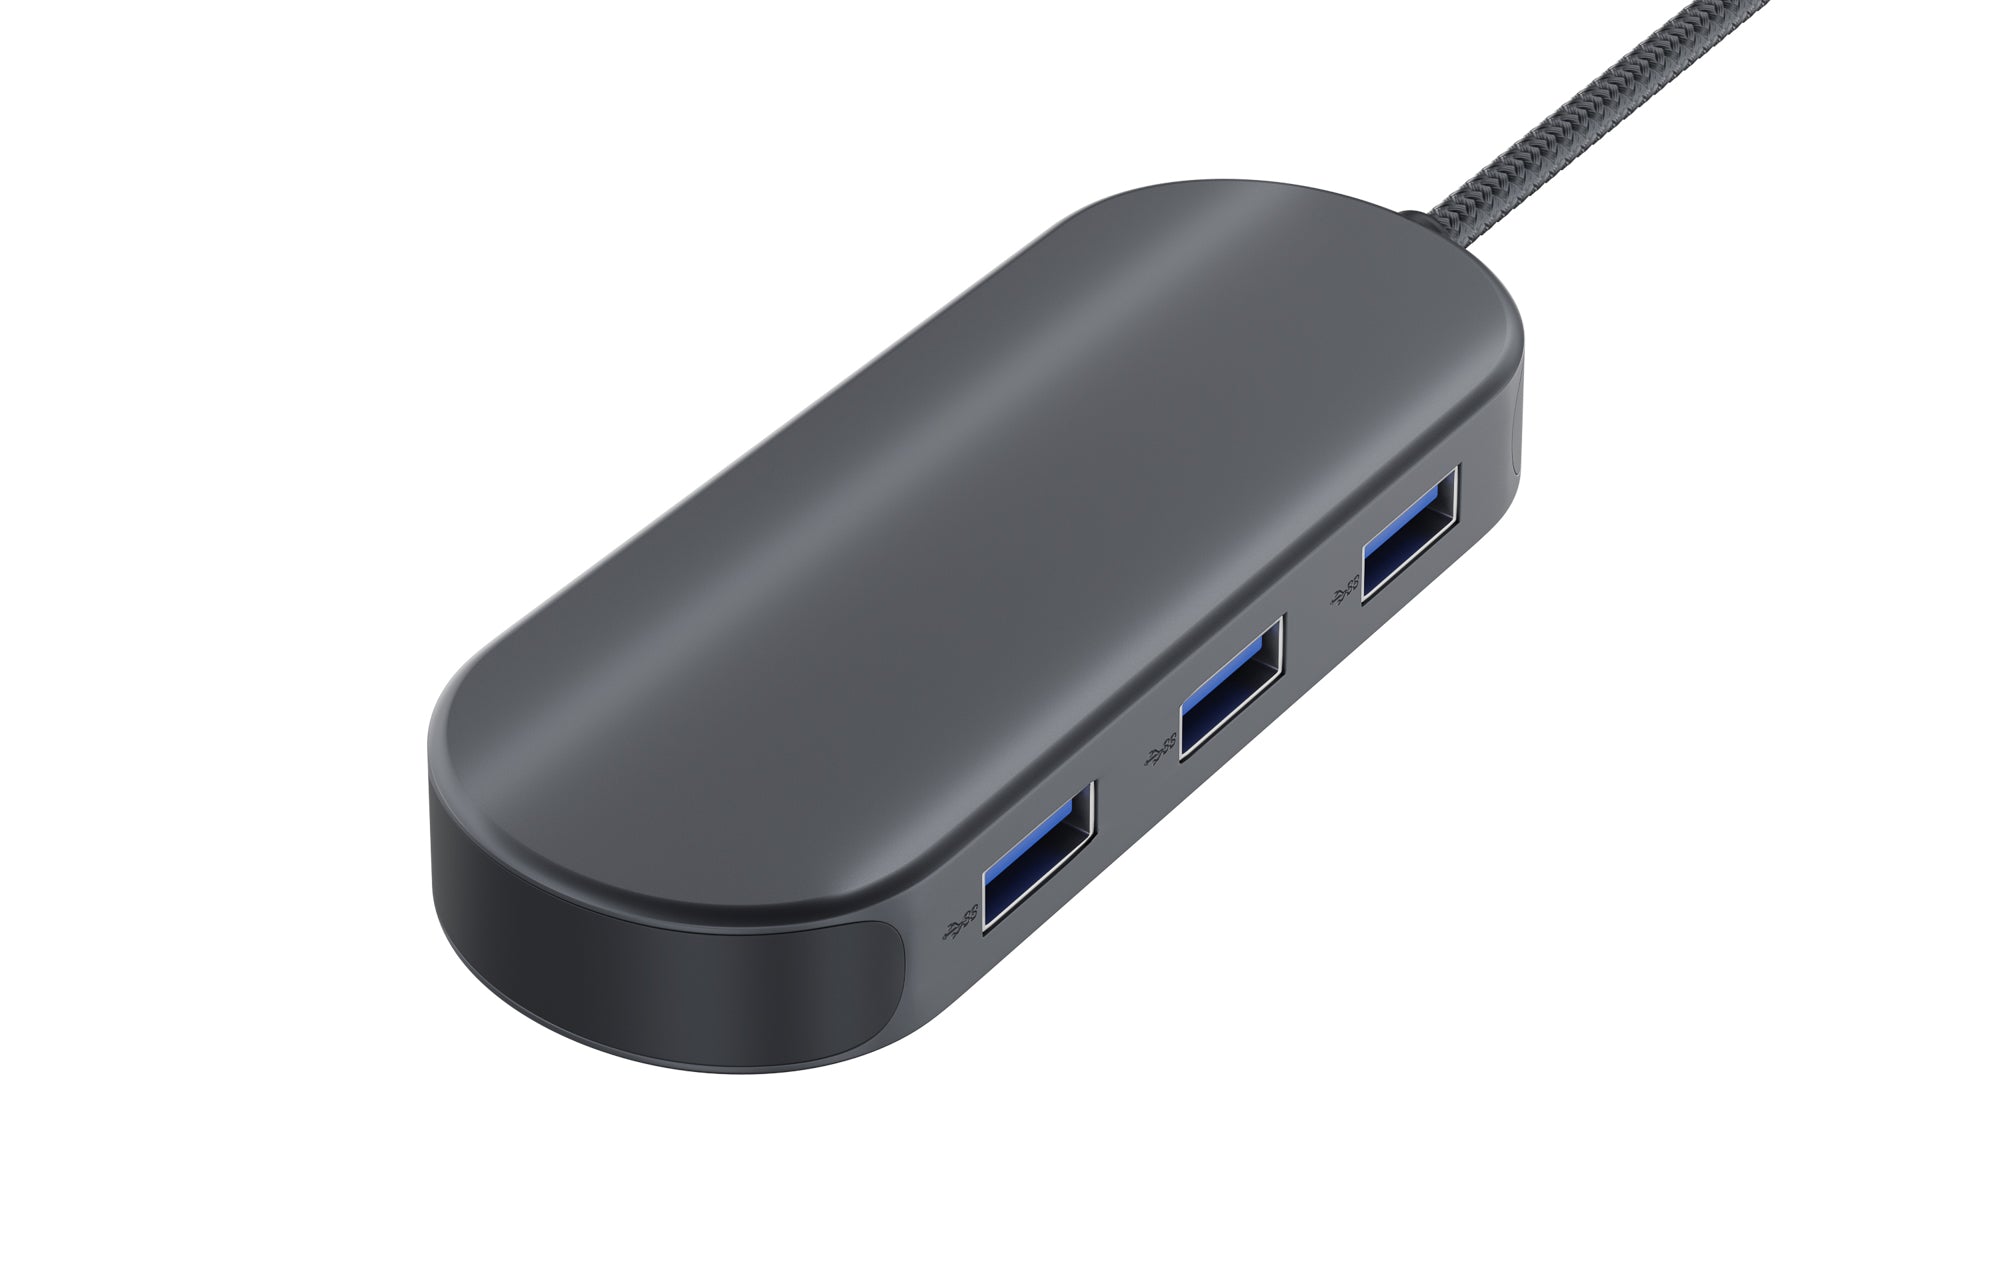 Newell USB-C Hub 7in1 - USB C Hub Connection Splitter, USB 3.0 with 4K HDMI, 10Gbps USB-C with 100W Power Delivery and 2x SD and MicroSD Card Reader - Graphite Colour